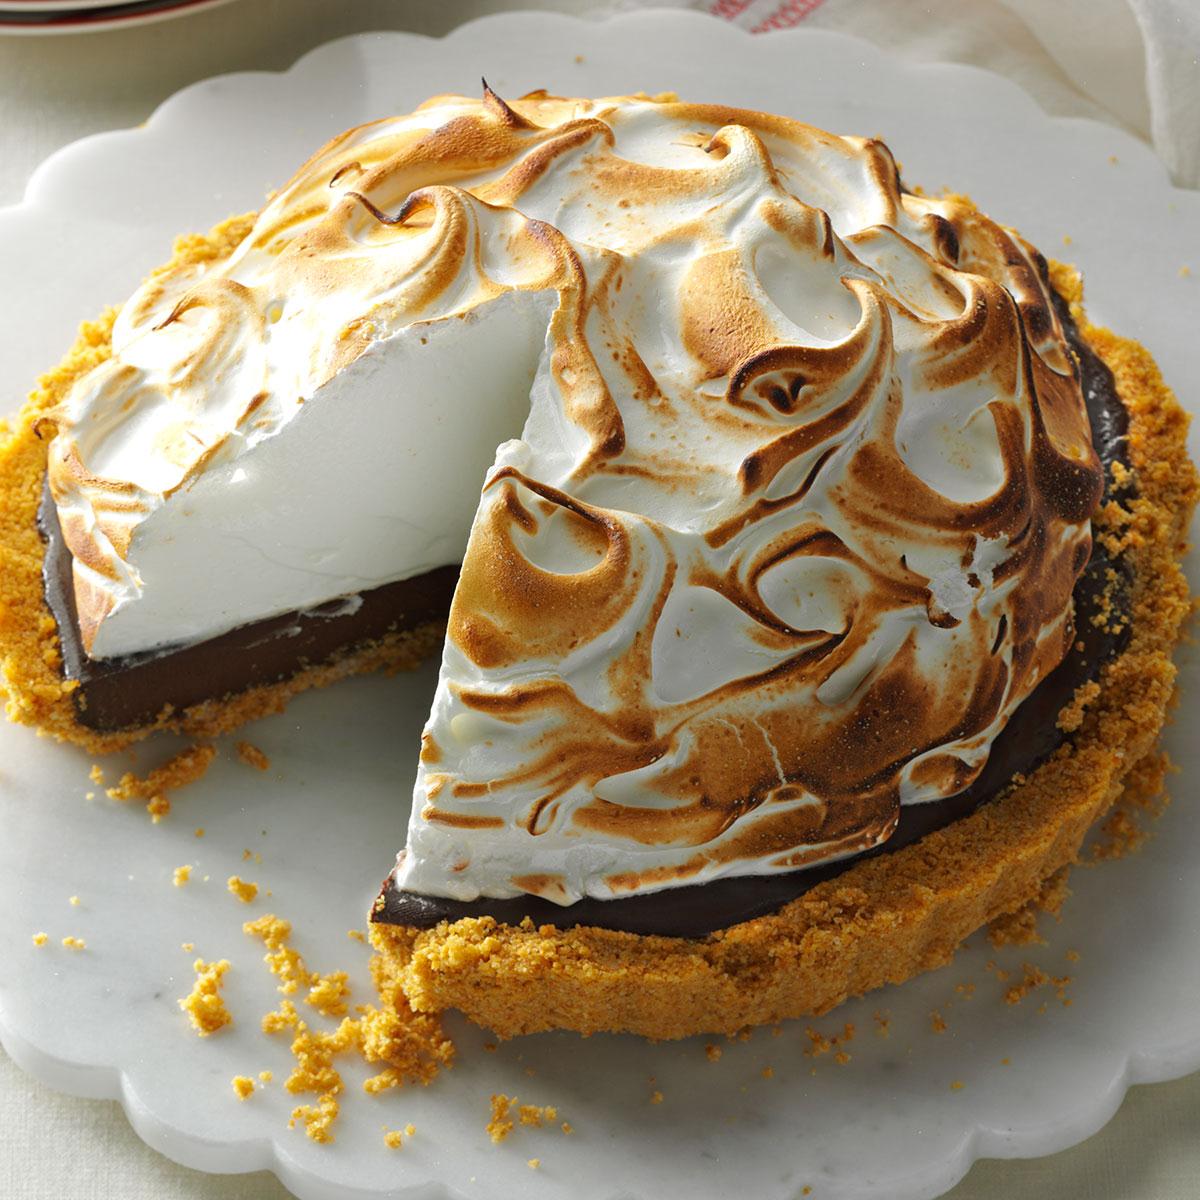 Chocolate S'mores Tart Recipe: How to Make It